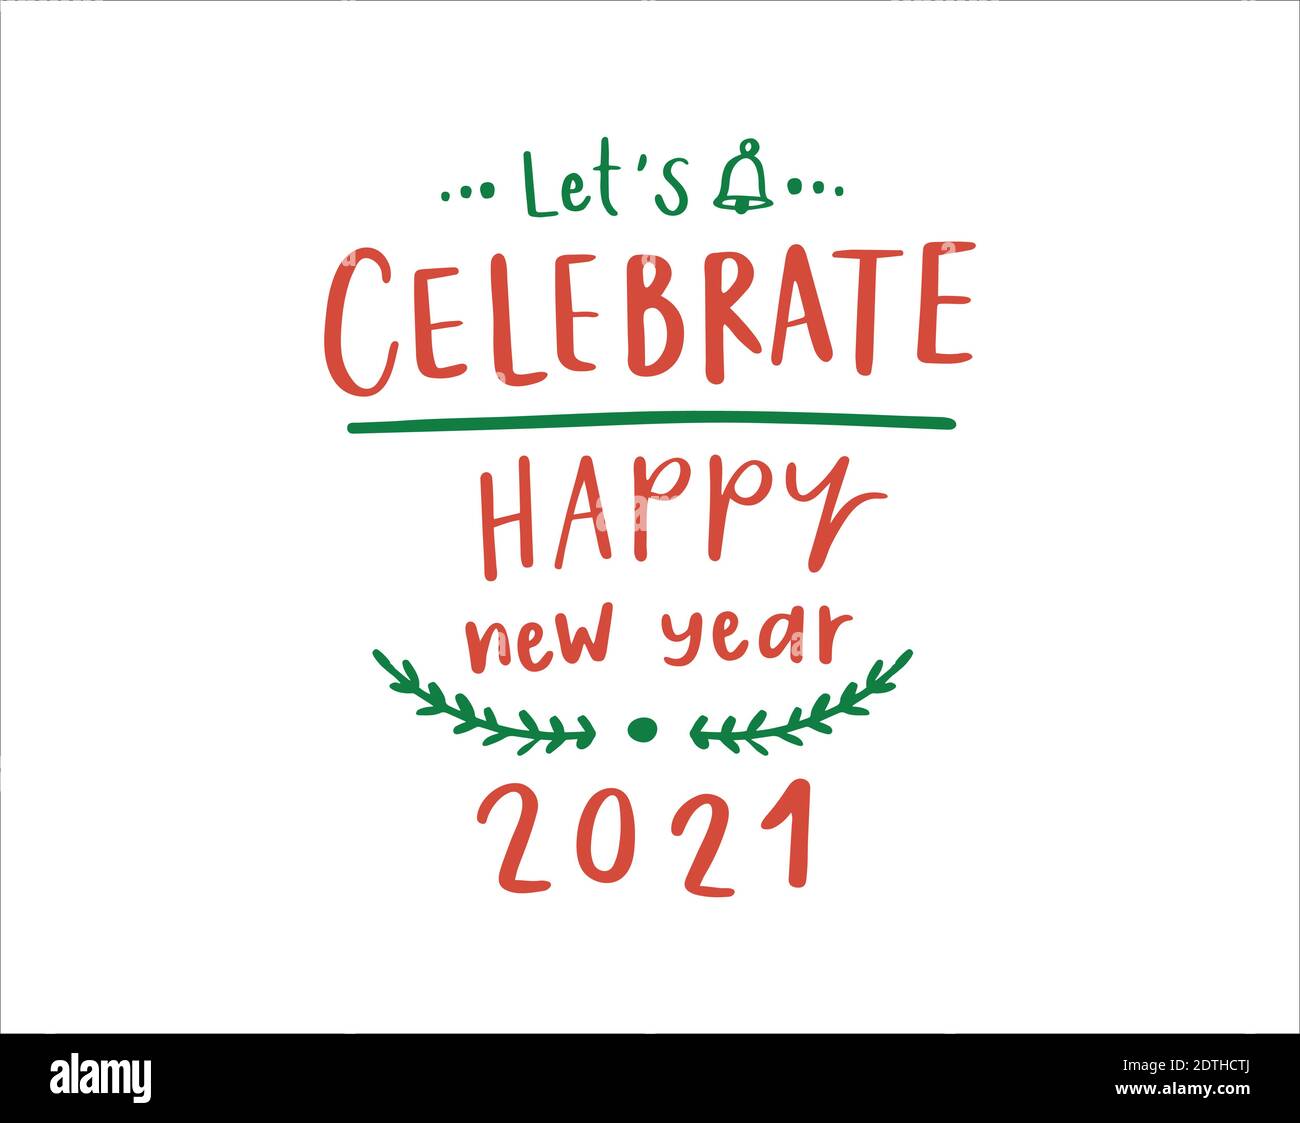 Let's celebrate happy new year 2021 hand drawn text on white background Stock Vector